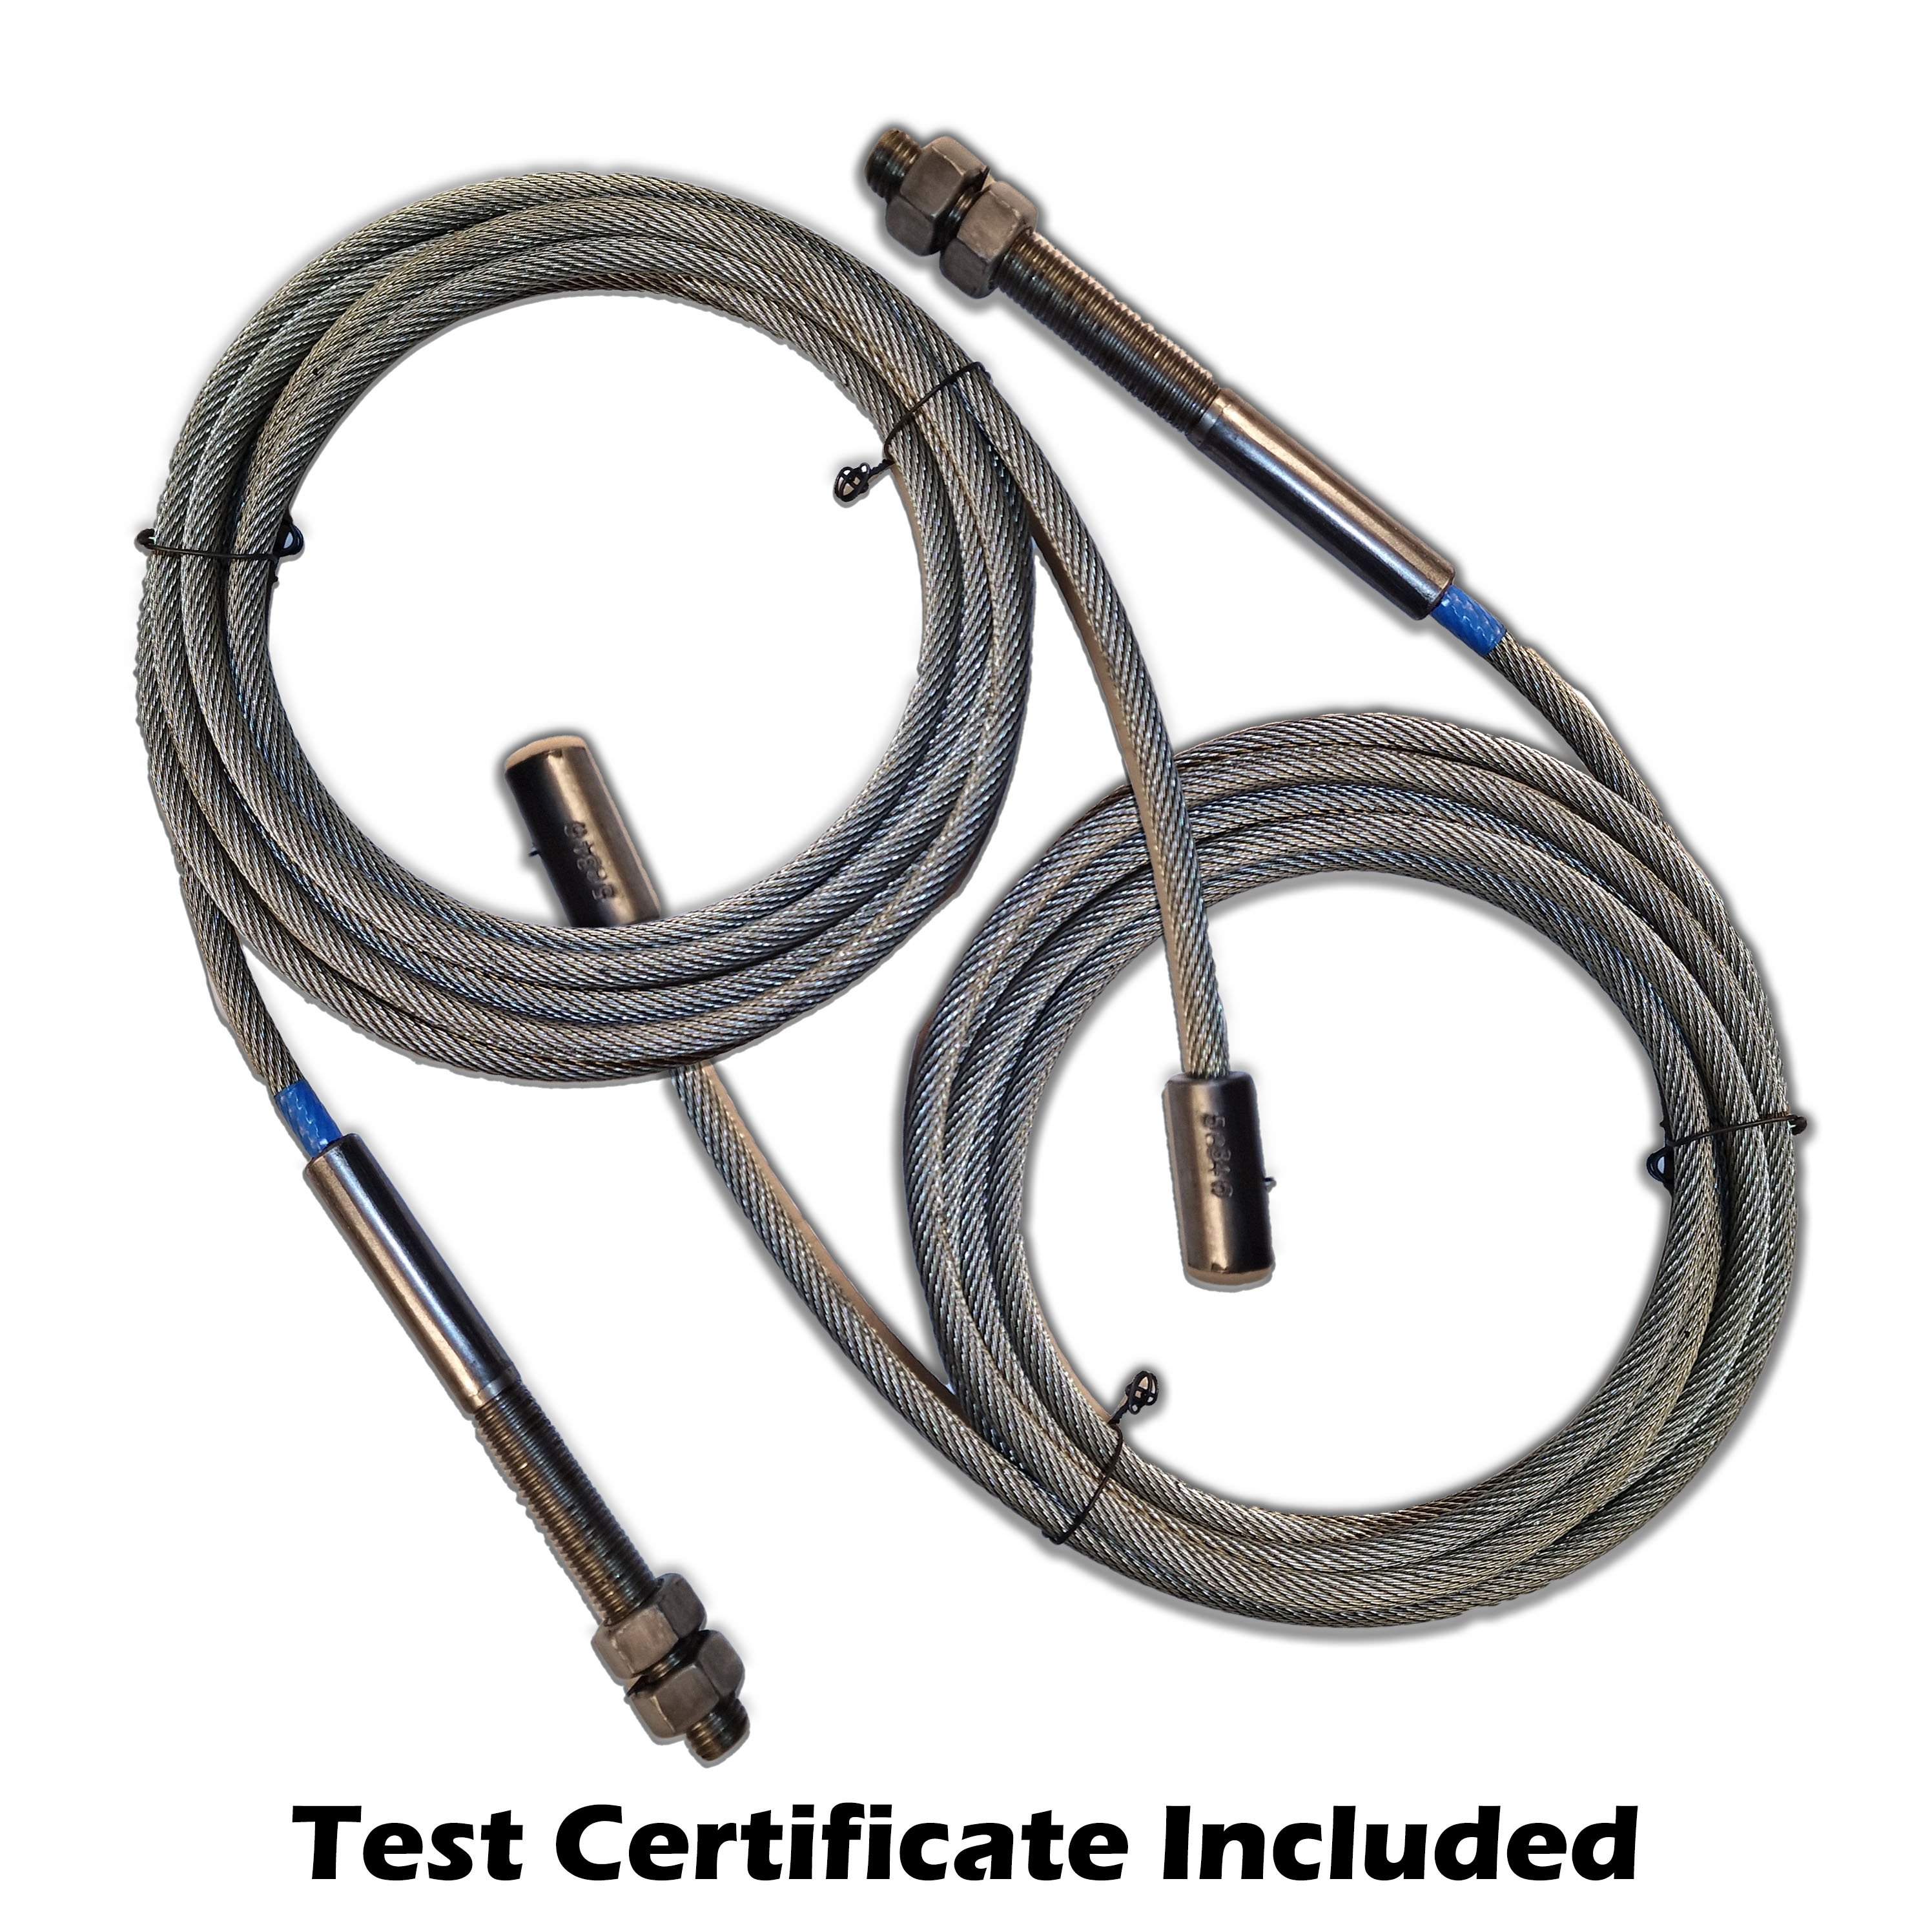 Laycock / Tecalemit Hi Speed 3T lift cables